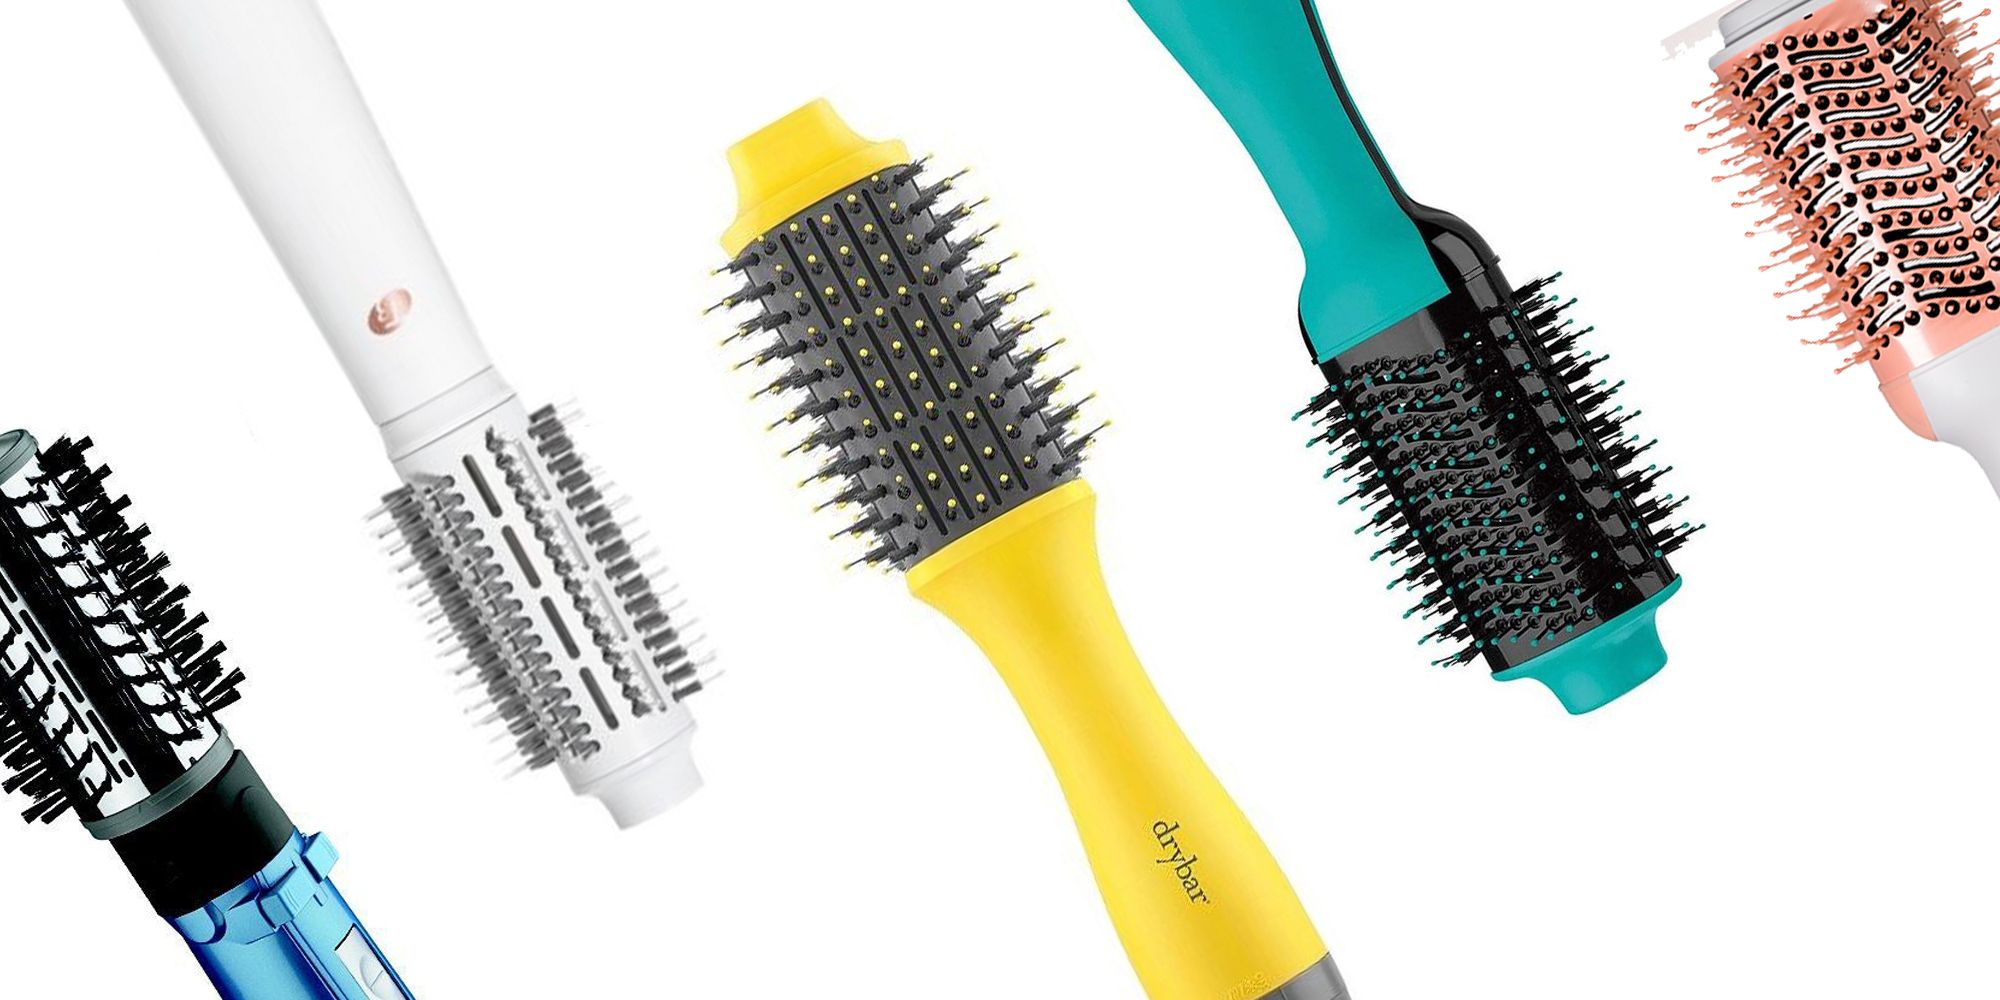 The 10 Best Blow Dryer Brushes - Hot Air Brushes for Every Hair Type 2023